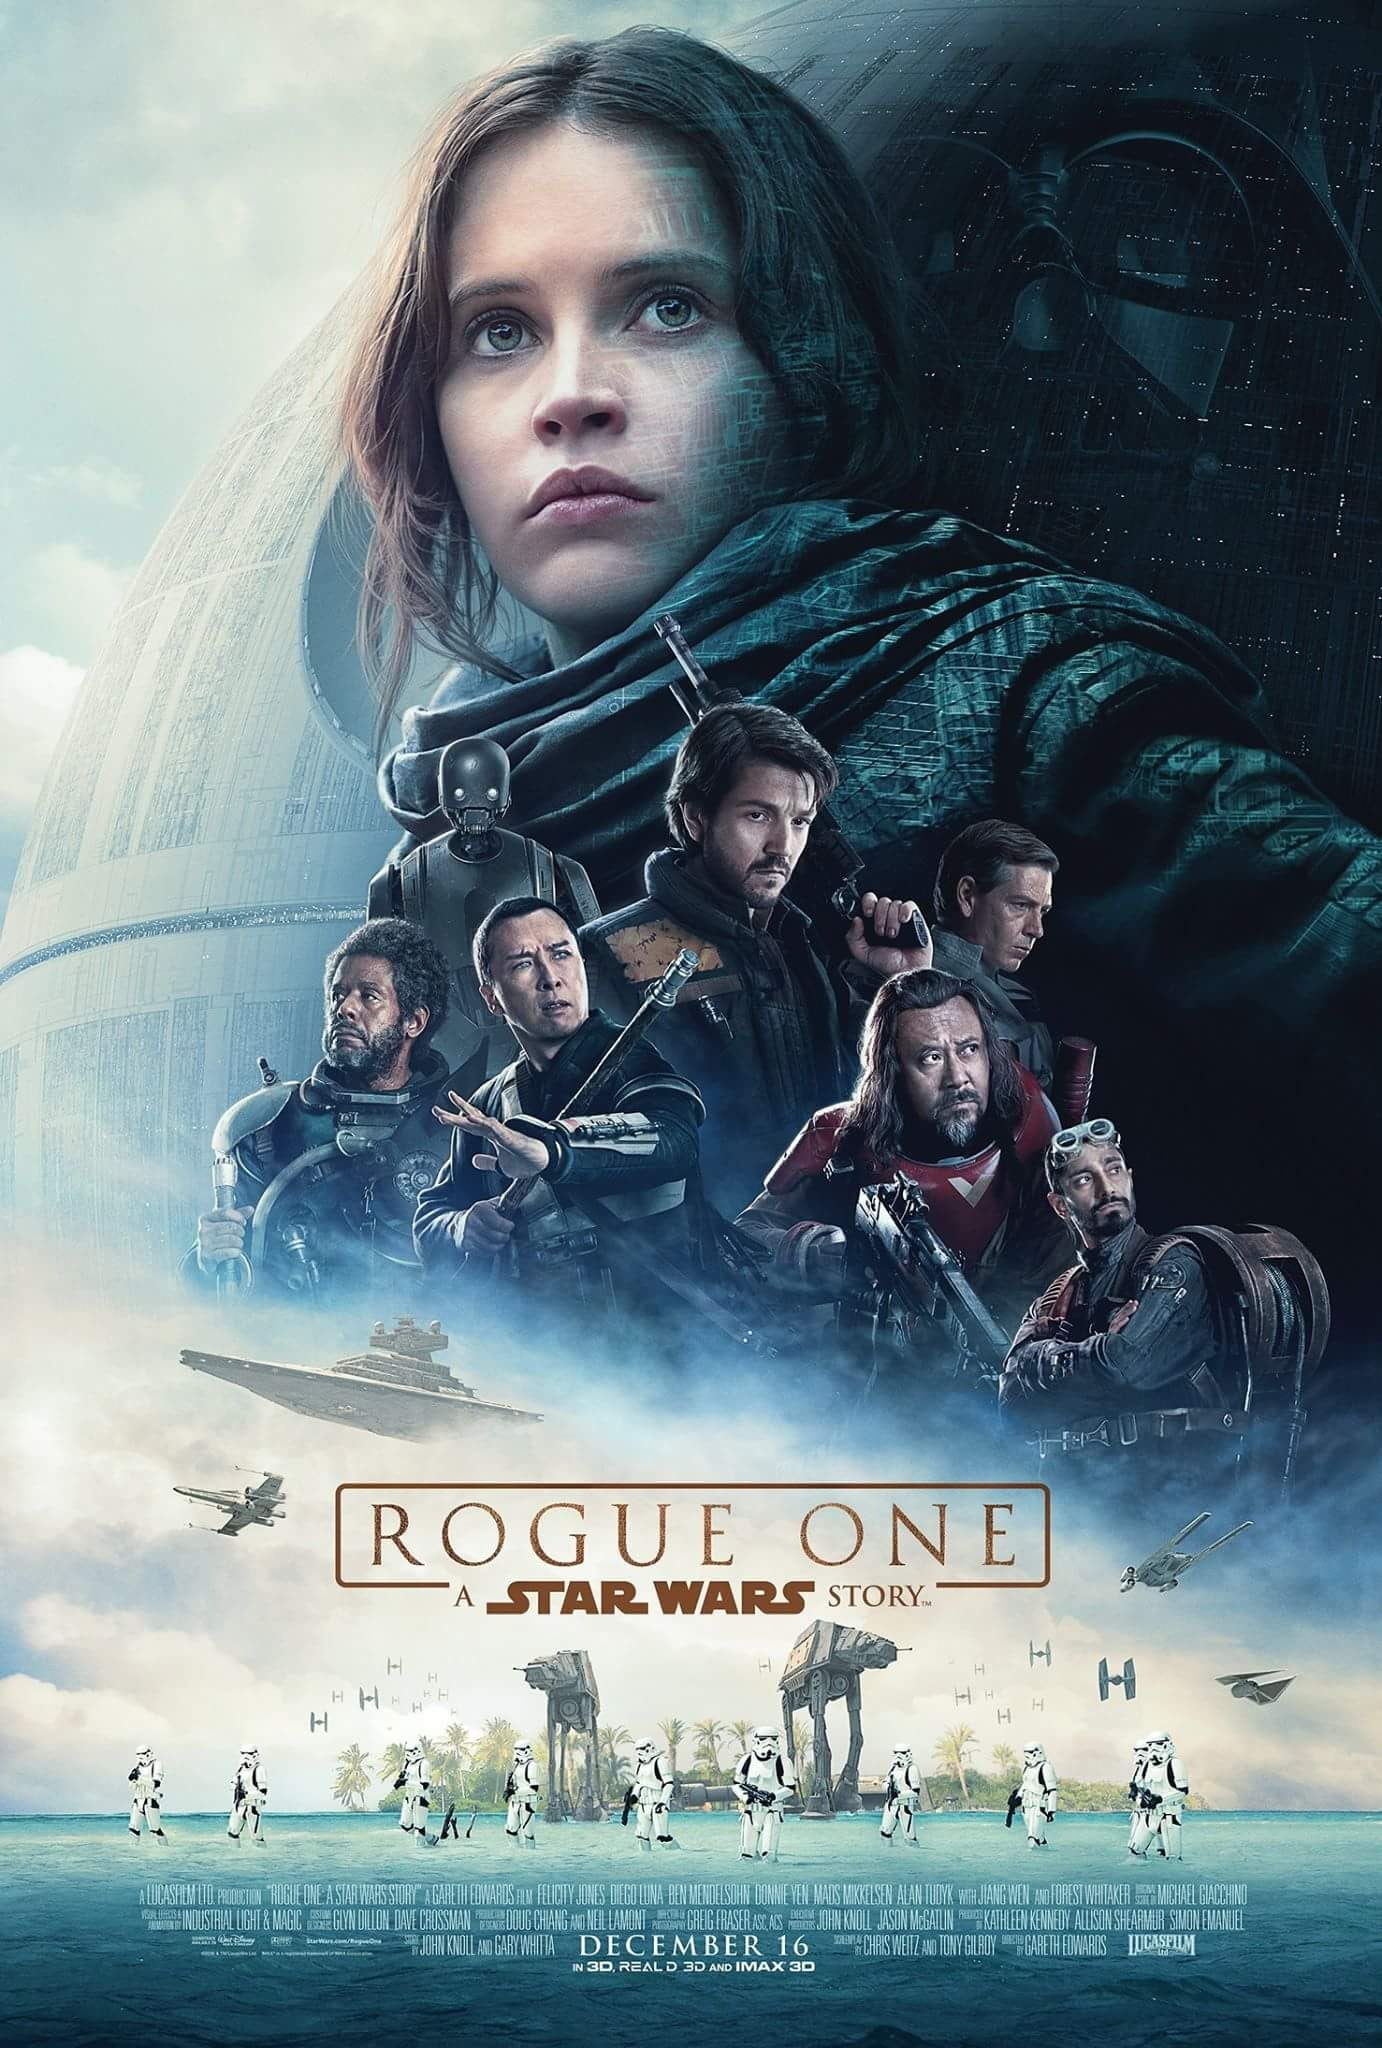 Rogue One Star Wars Story wallpaper, Rogue One: A Star Wars Story